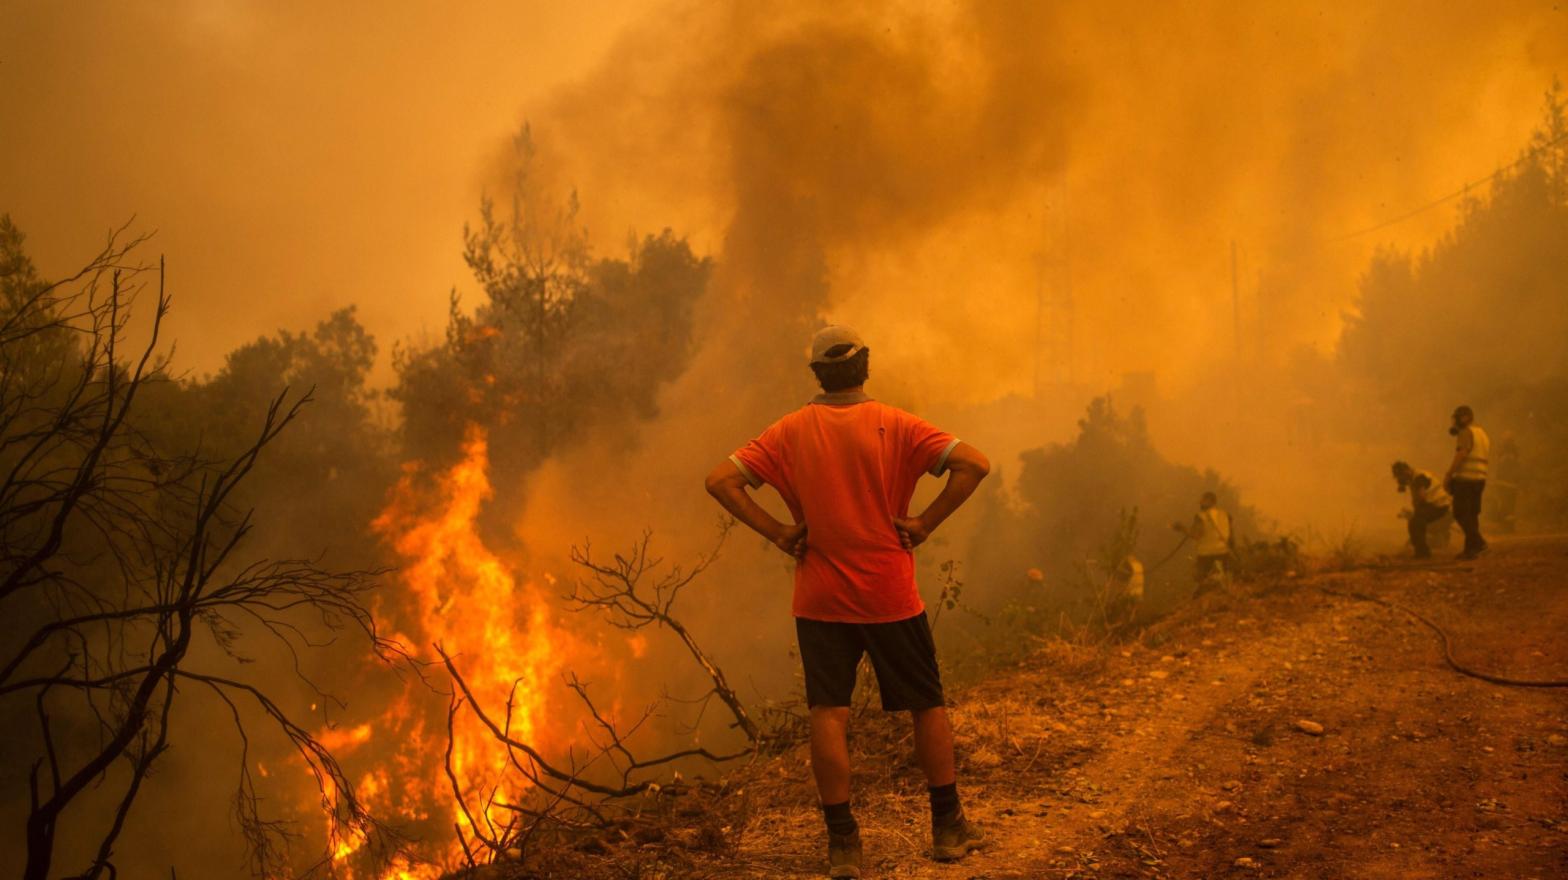 A volunteer watches as firefighters use a water hose to extinguish the blaze of a forest fire in the village of Glatsona on Evia (Euboea) island, on August 9, 2021.  (Photo: ANGELOS TZORTZINIS, Getty Images)